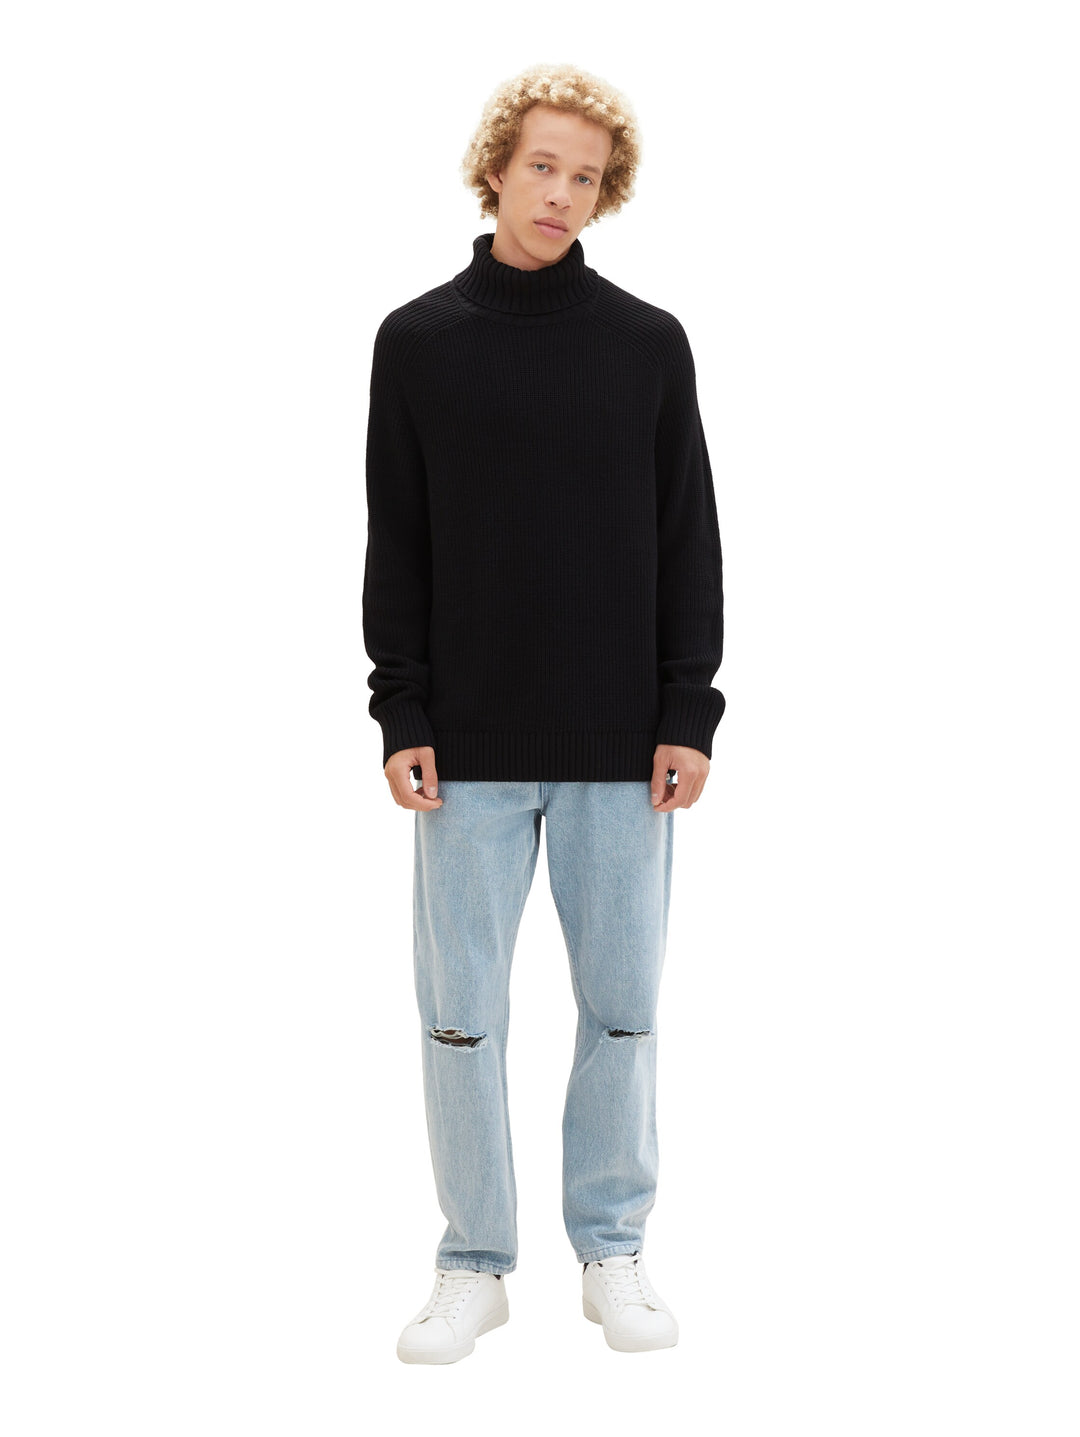 RELAXED TURTLENECK KNIT